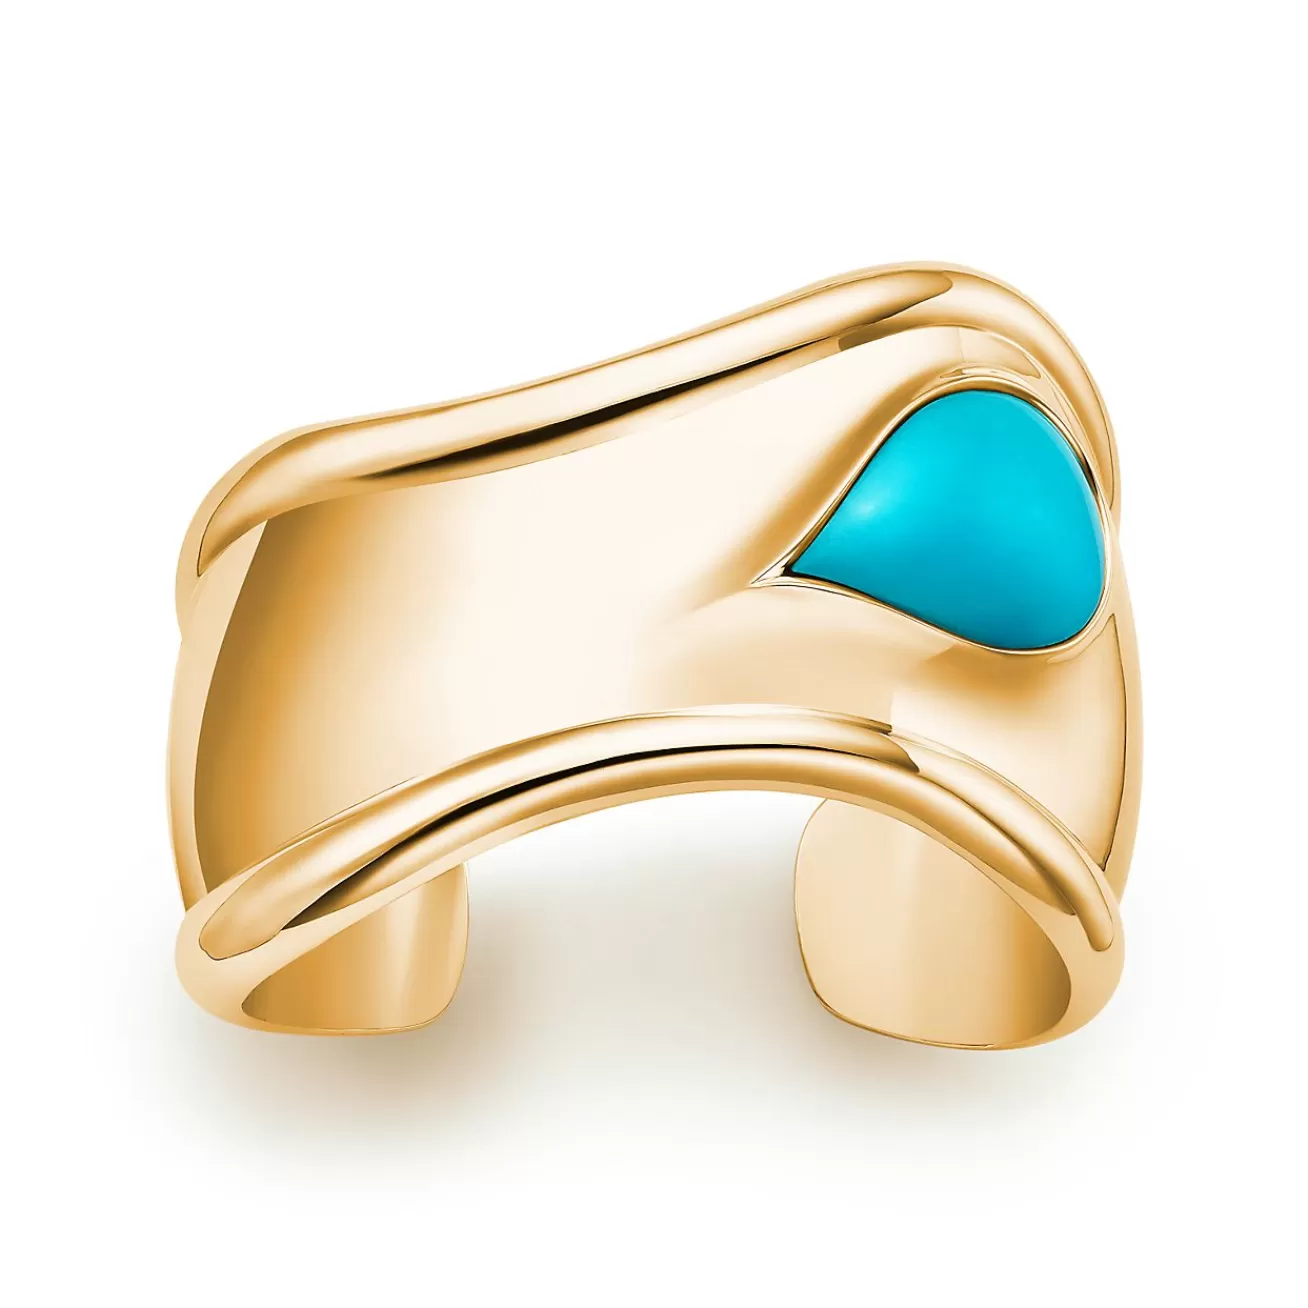 Tiffany & Co. Elsa Peretti® Small Bone Cuff in Yellow Gold with Turquoise, 43 mm Wide | ^ Bracelets | Gold Jewelry